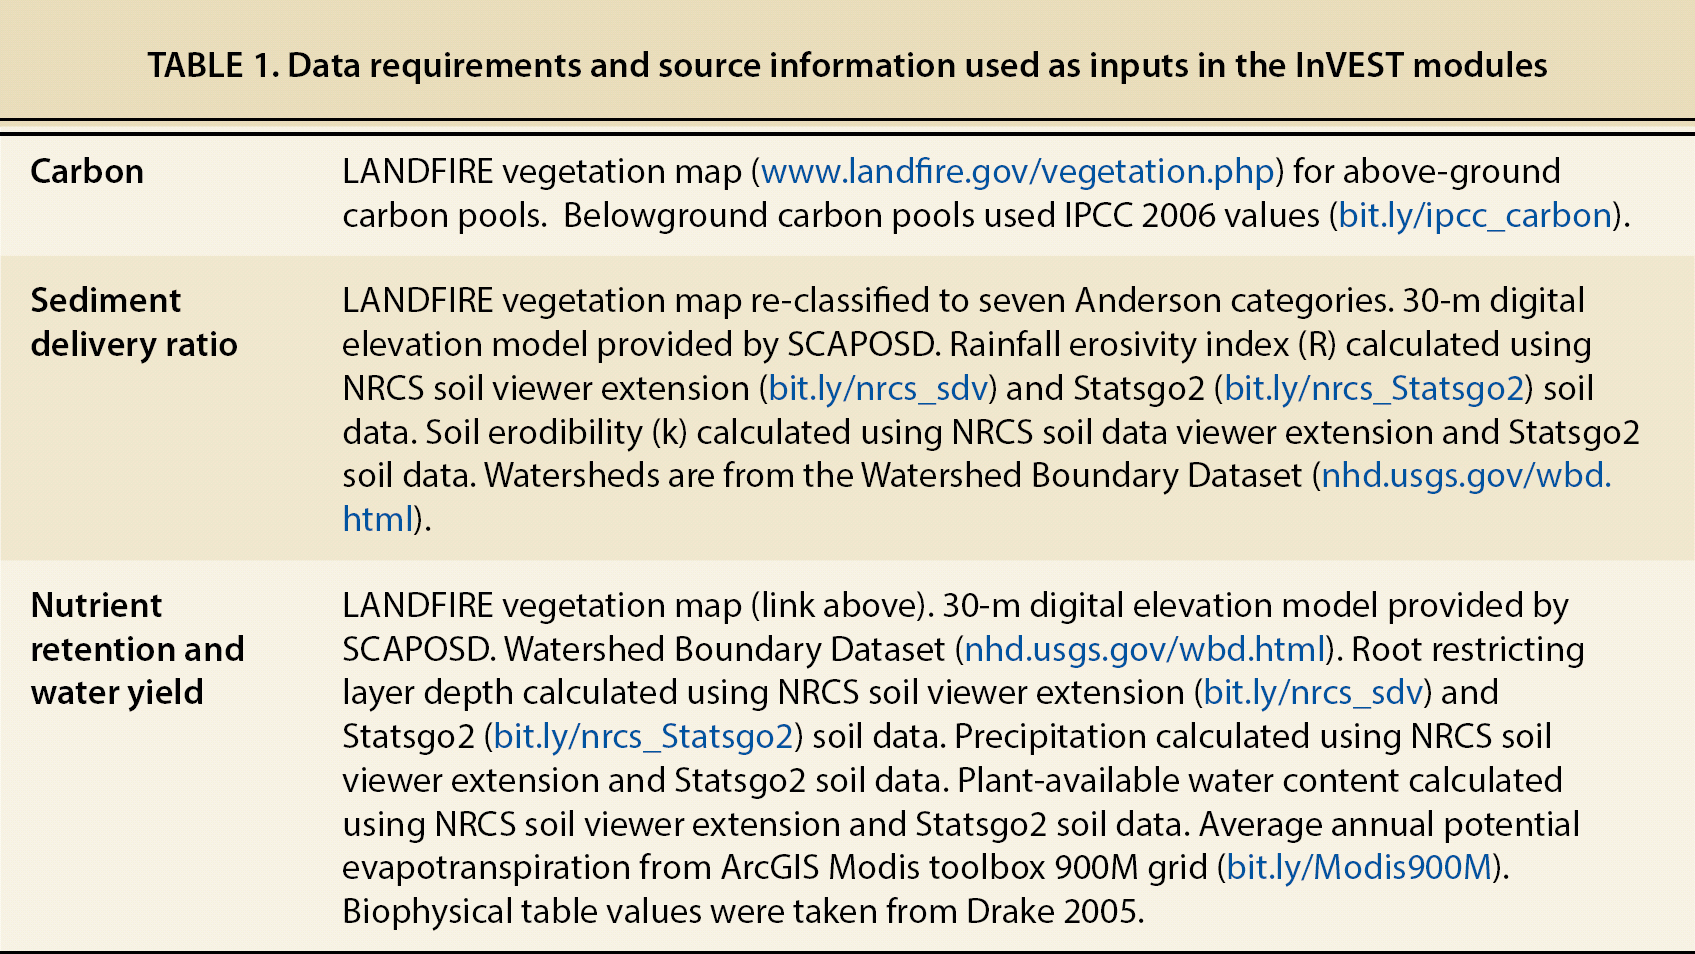 Data requirements and source information used as inputs in the InVEST modules